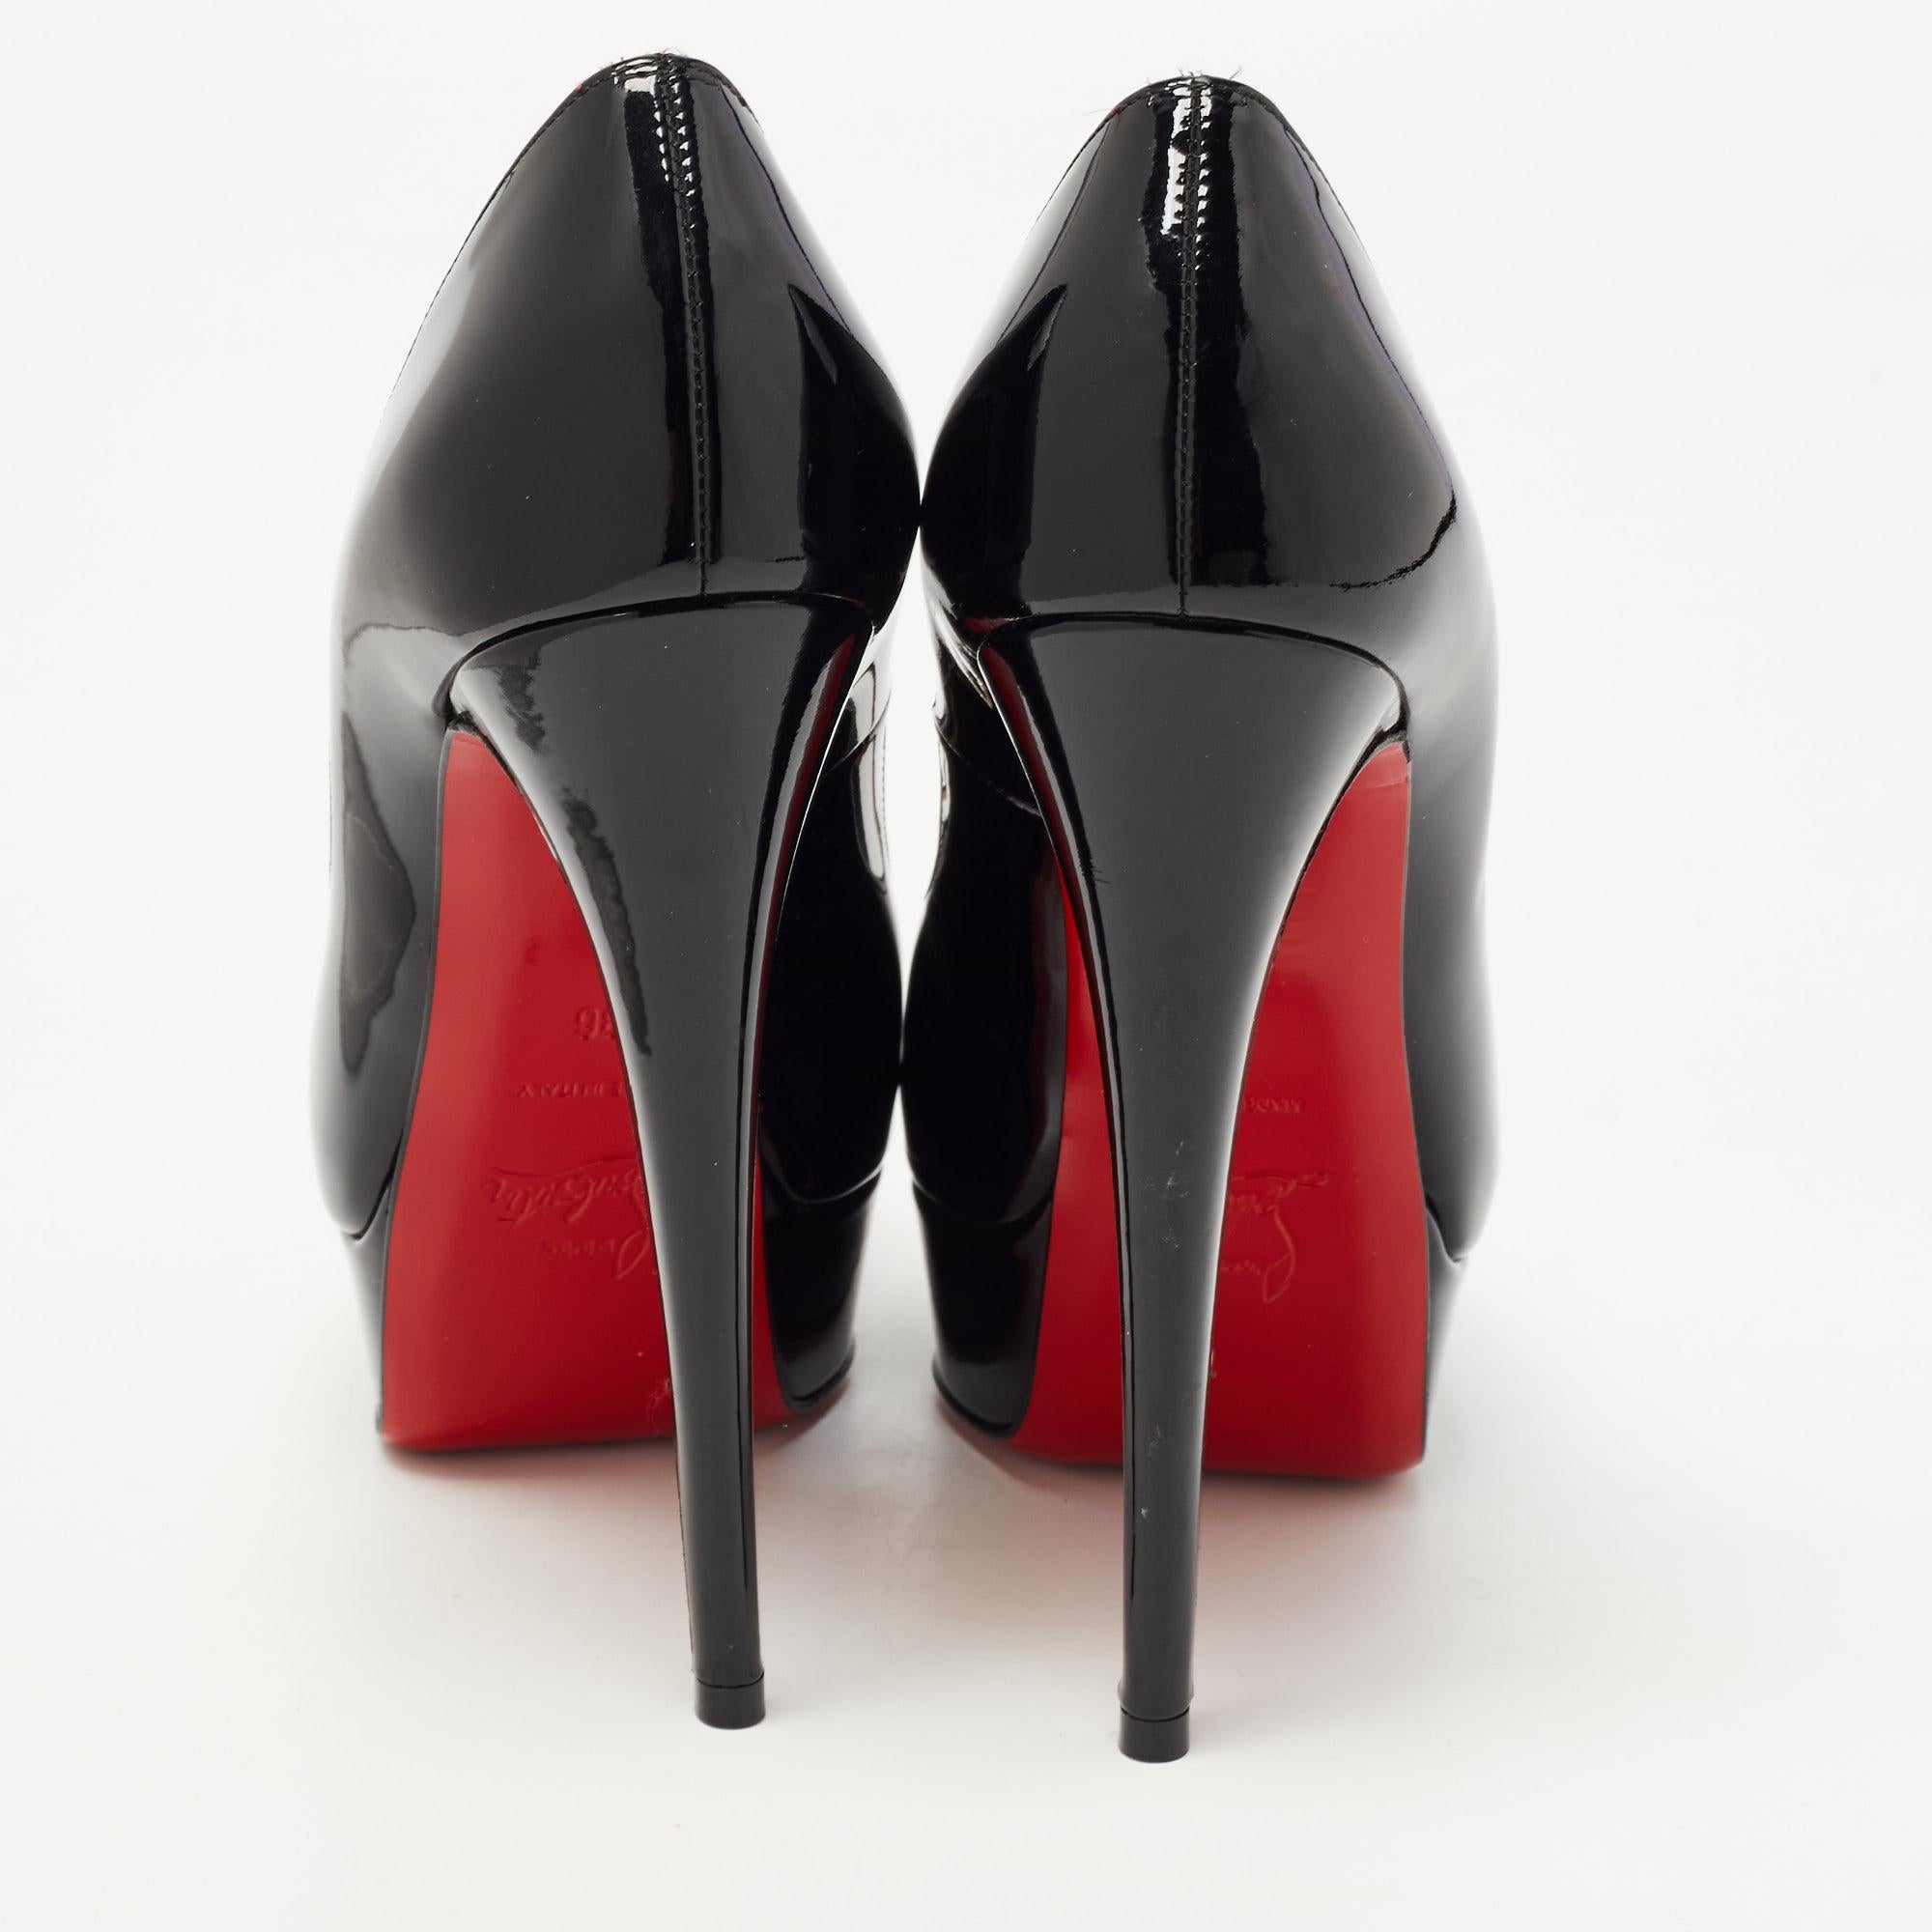 Stand out from the crowd with this pair of Christian Louboutin pumps that exude high fashion with class. Crafted from patent leather, this is a creation from their Lady Peep collection. It features a classy black shade with peep-toe silhouette.